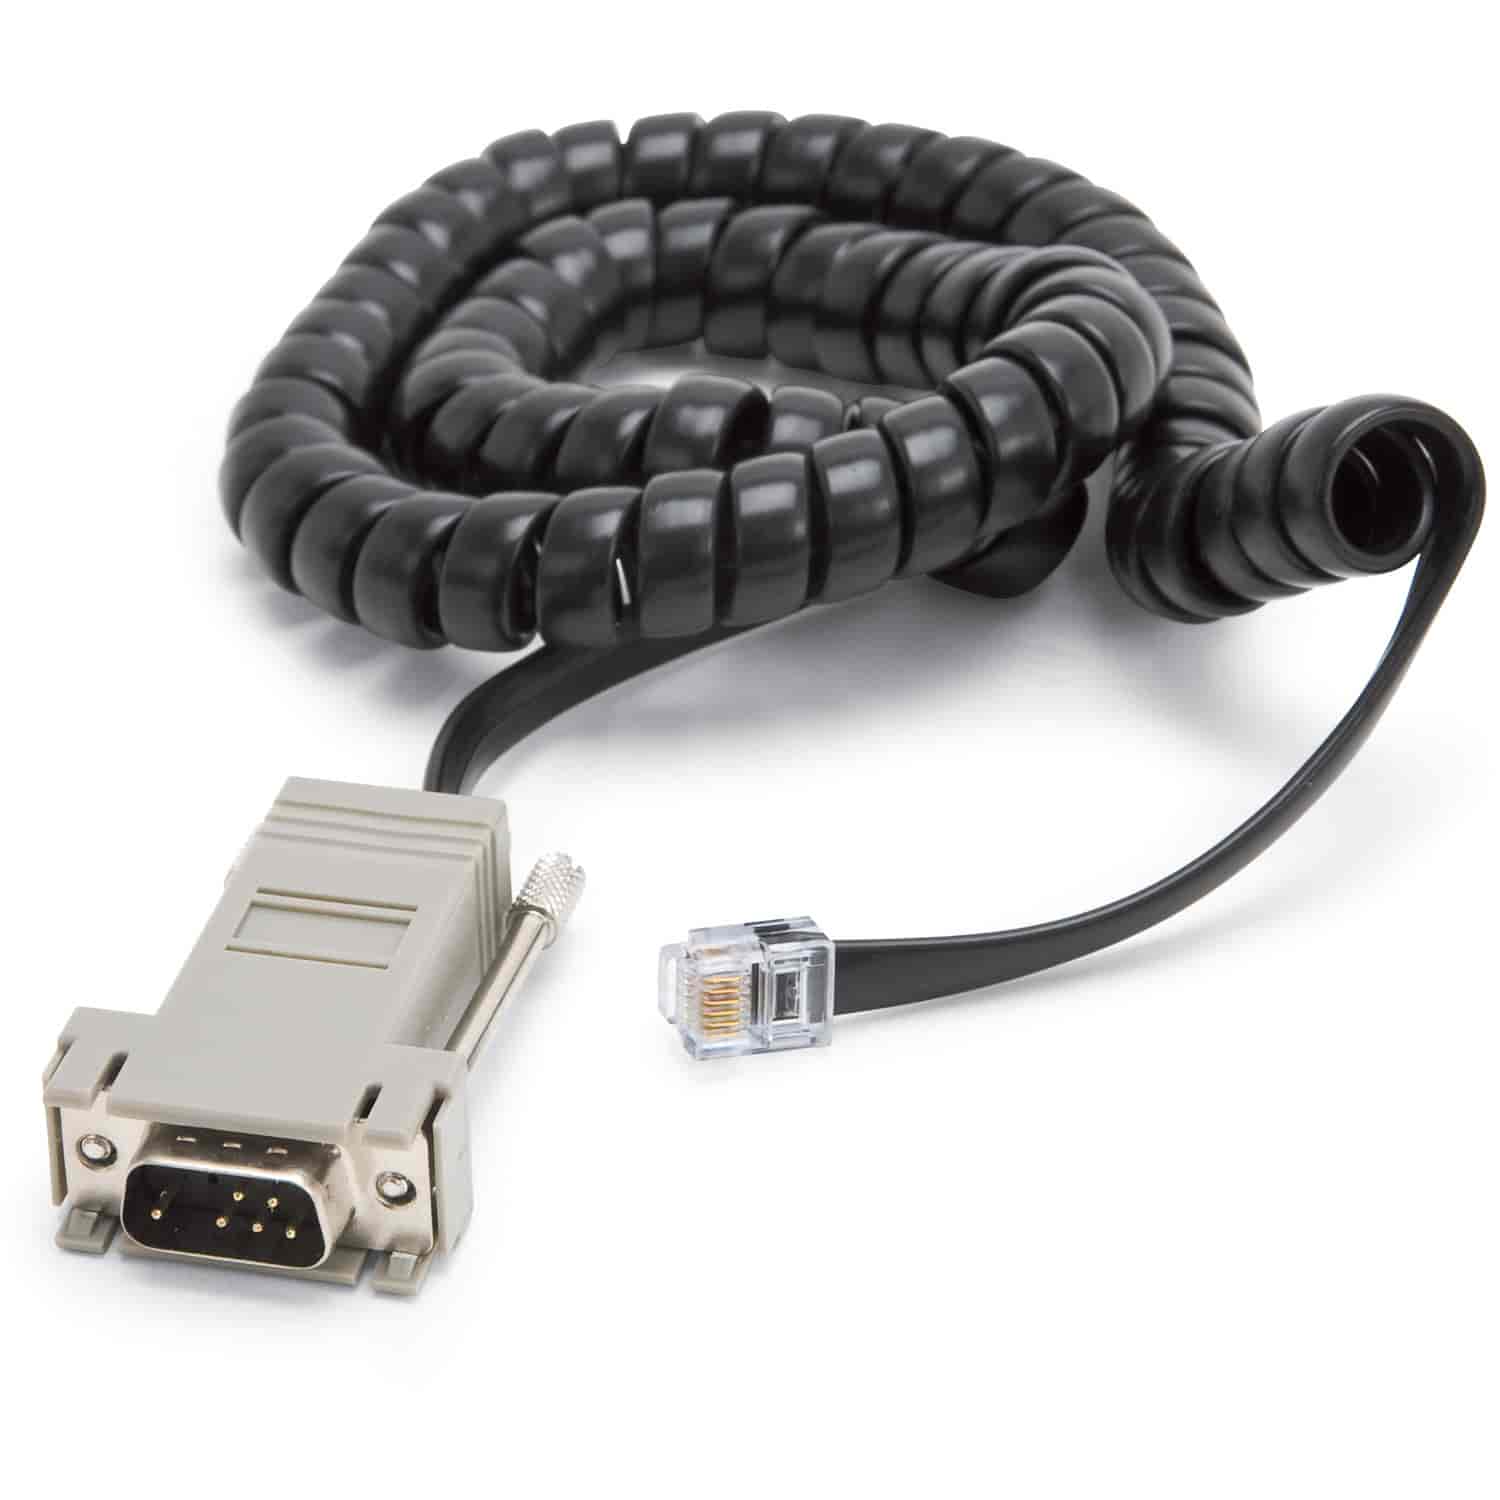 Pro-Flo Calibration Module Cord & Adapter Only